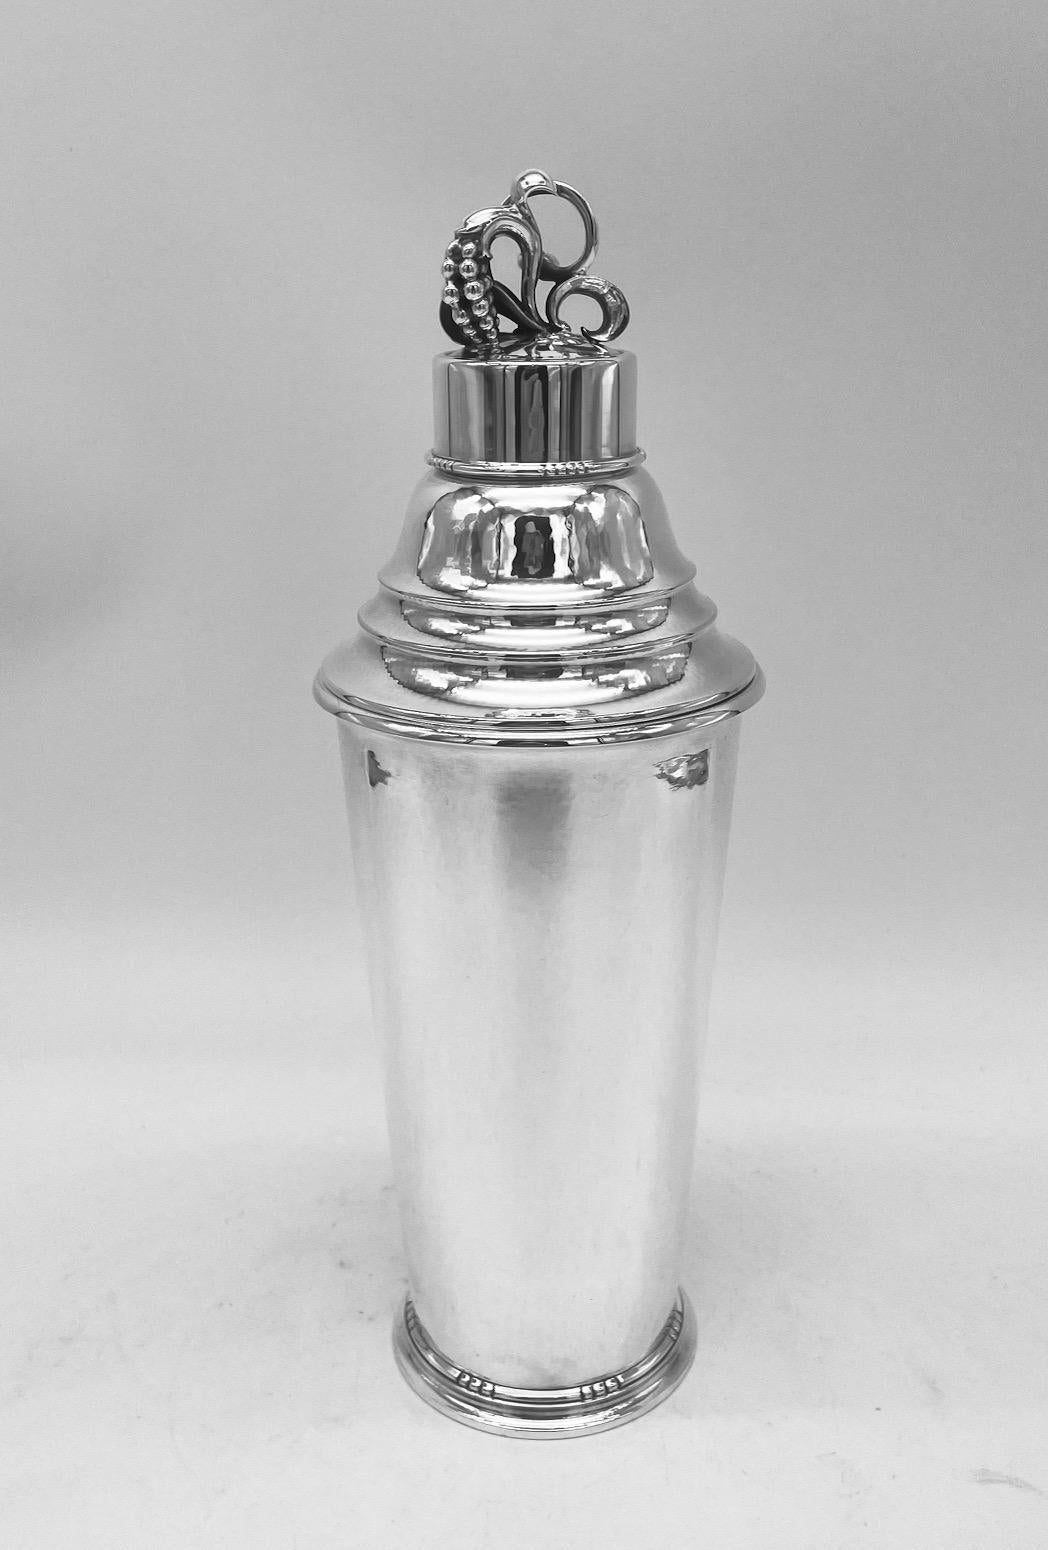 A large and stylish sterling silver cocktail shaker, made by the Danish firm of Georg Jensen and designed by one of their most important designers, Harald Nielsen.
The shaker is spot hammered all over, and has a bud and leaf finial on the removable